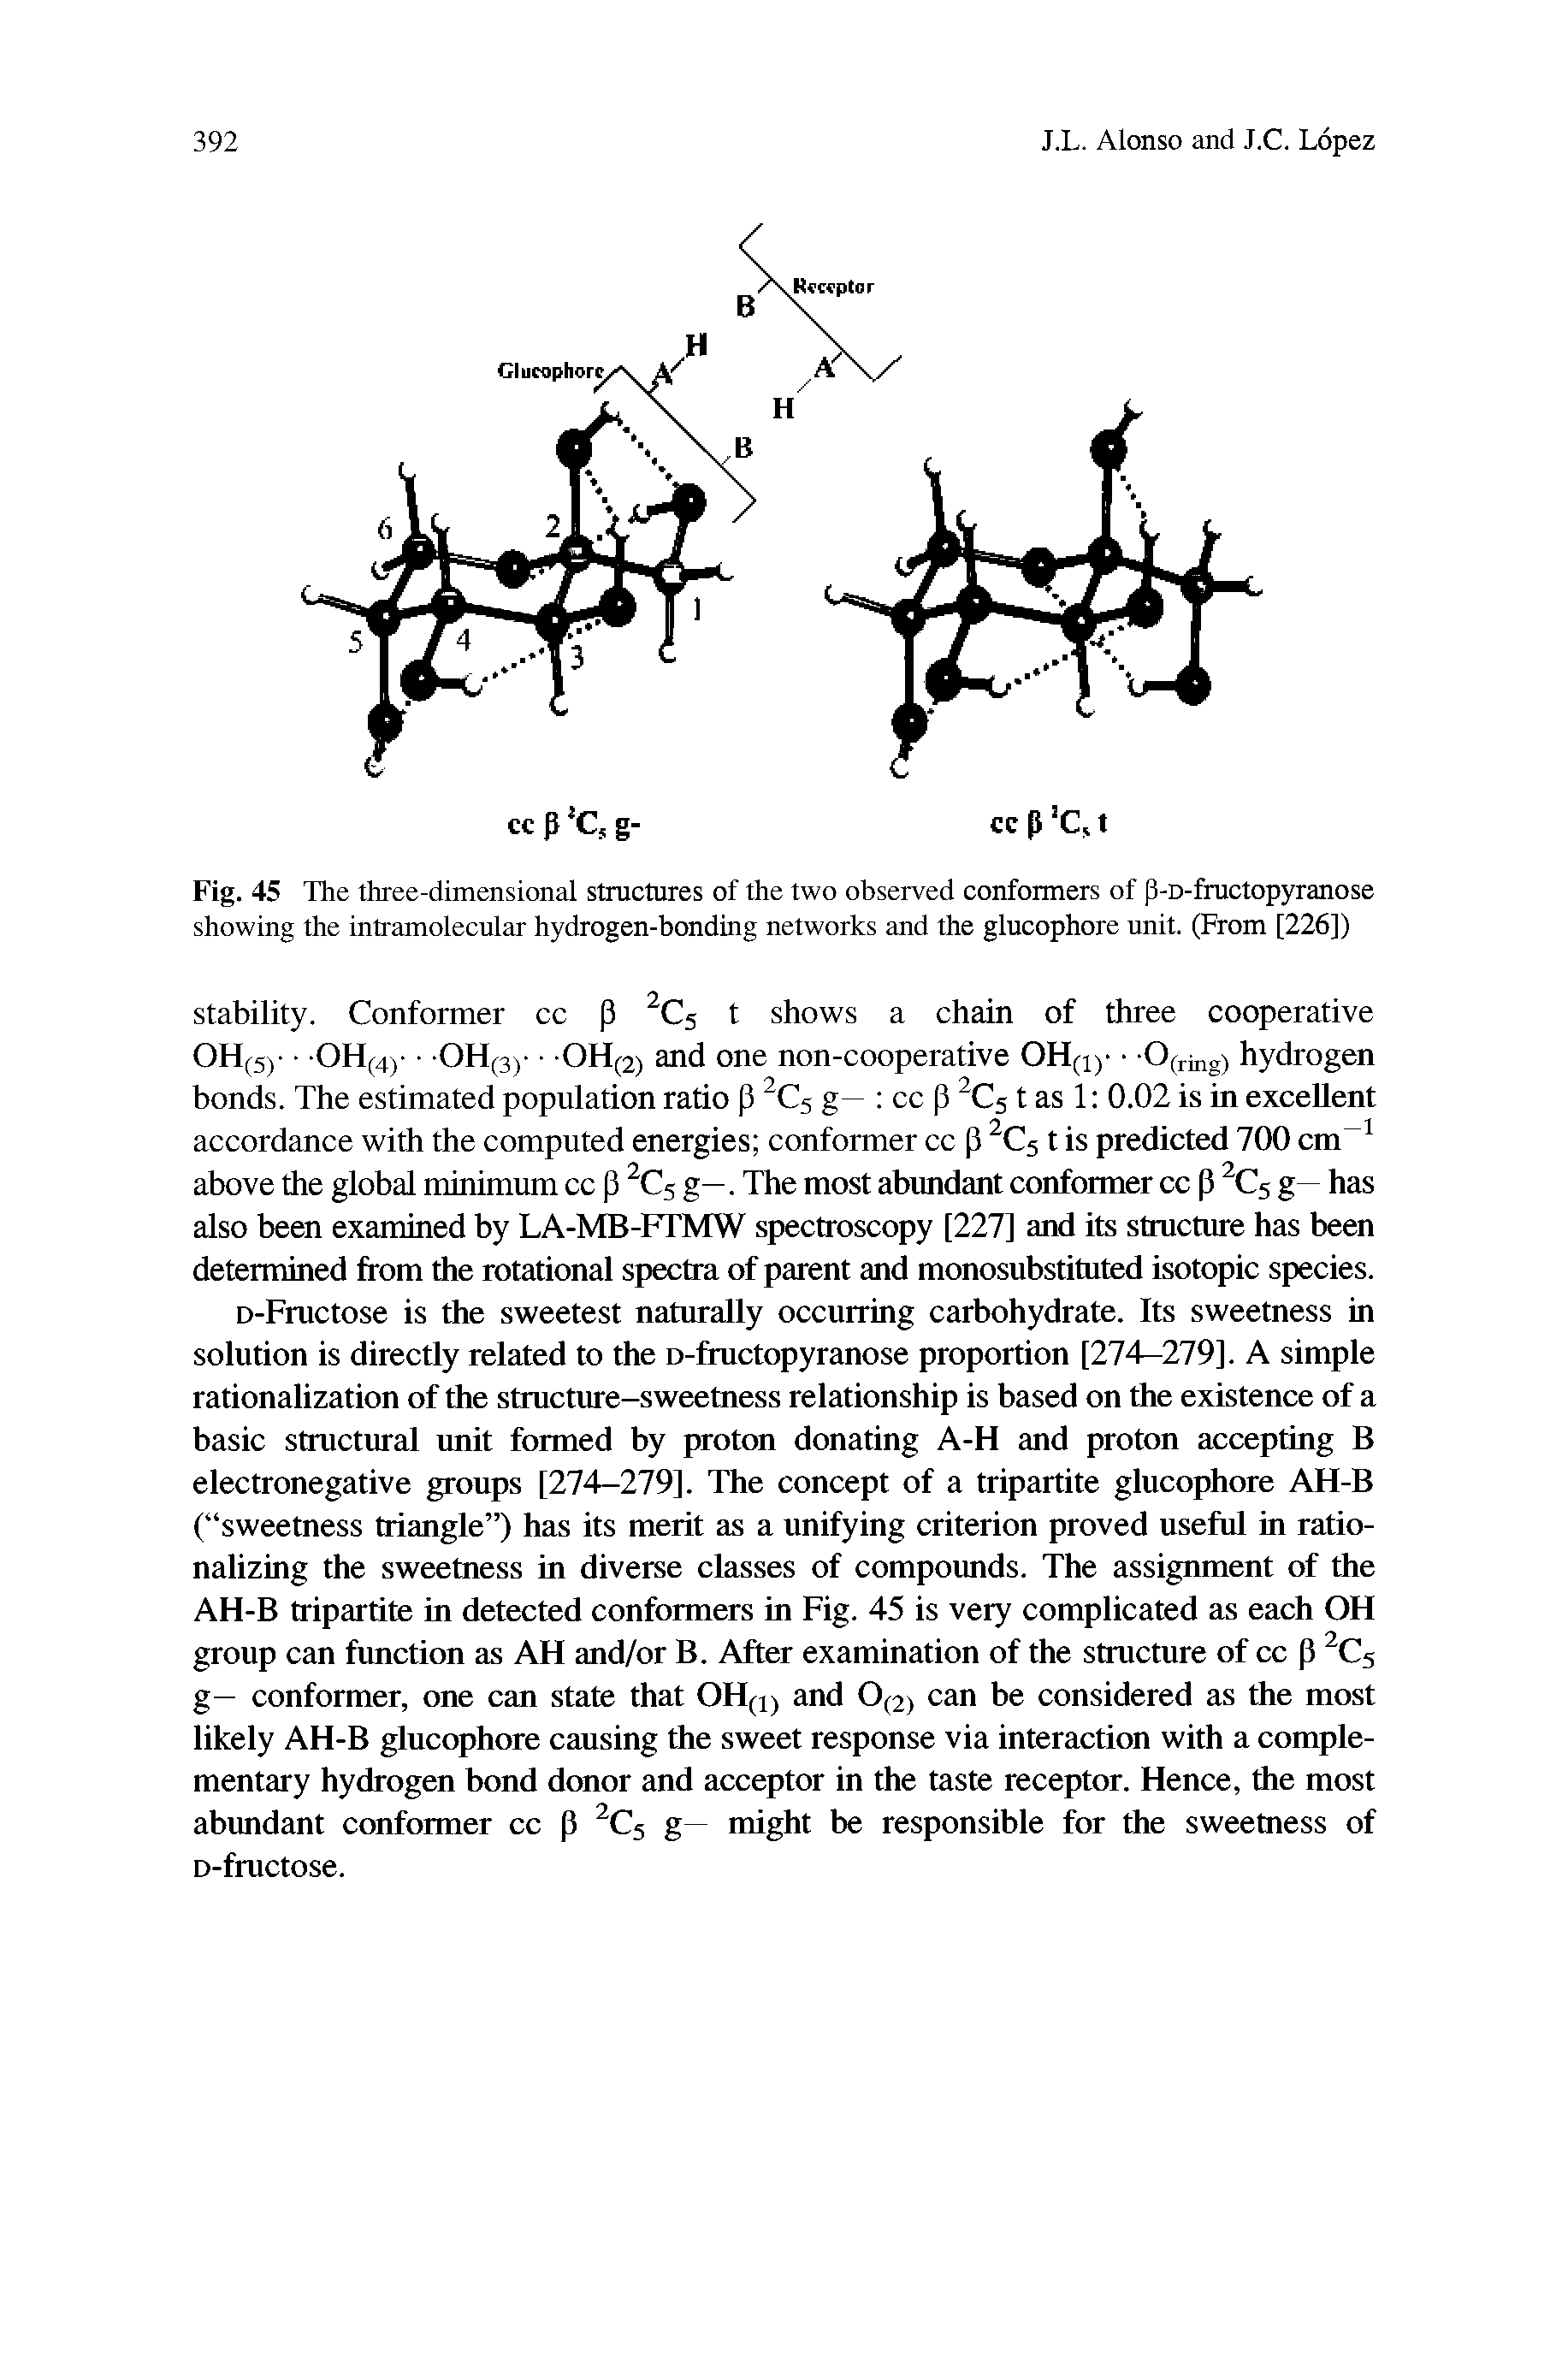 Fig. 45 The three-dimensional structures of the two observed coirformers of p-D-fructopyranose showing the intramolecular hydrogen-bonding networks and the glucophore unit. (From [226])...